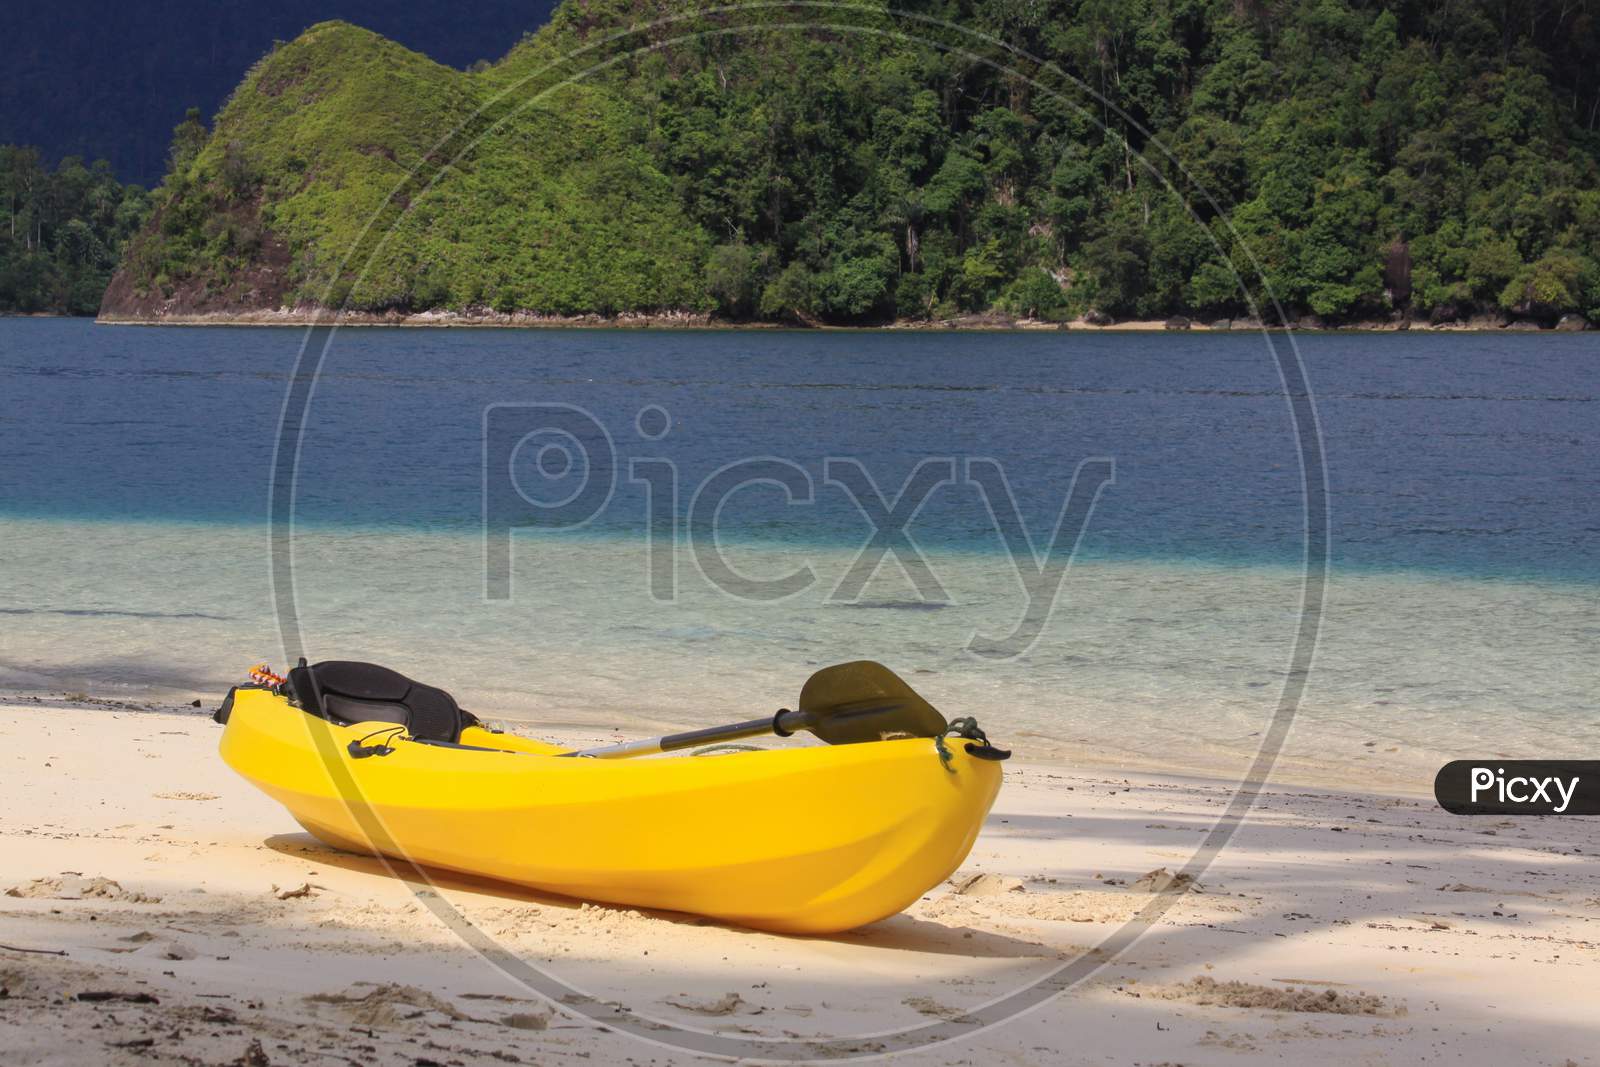 Yellow Kayak On The Beach Of Exotic Tropical Island